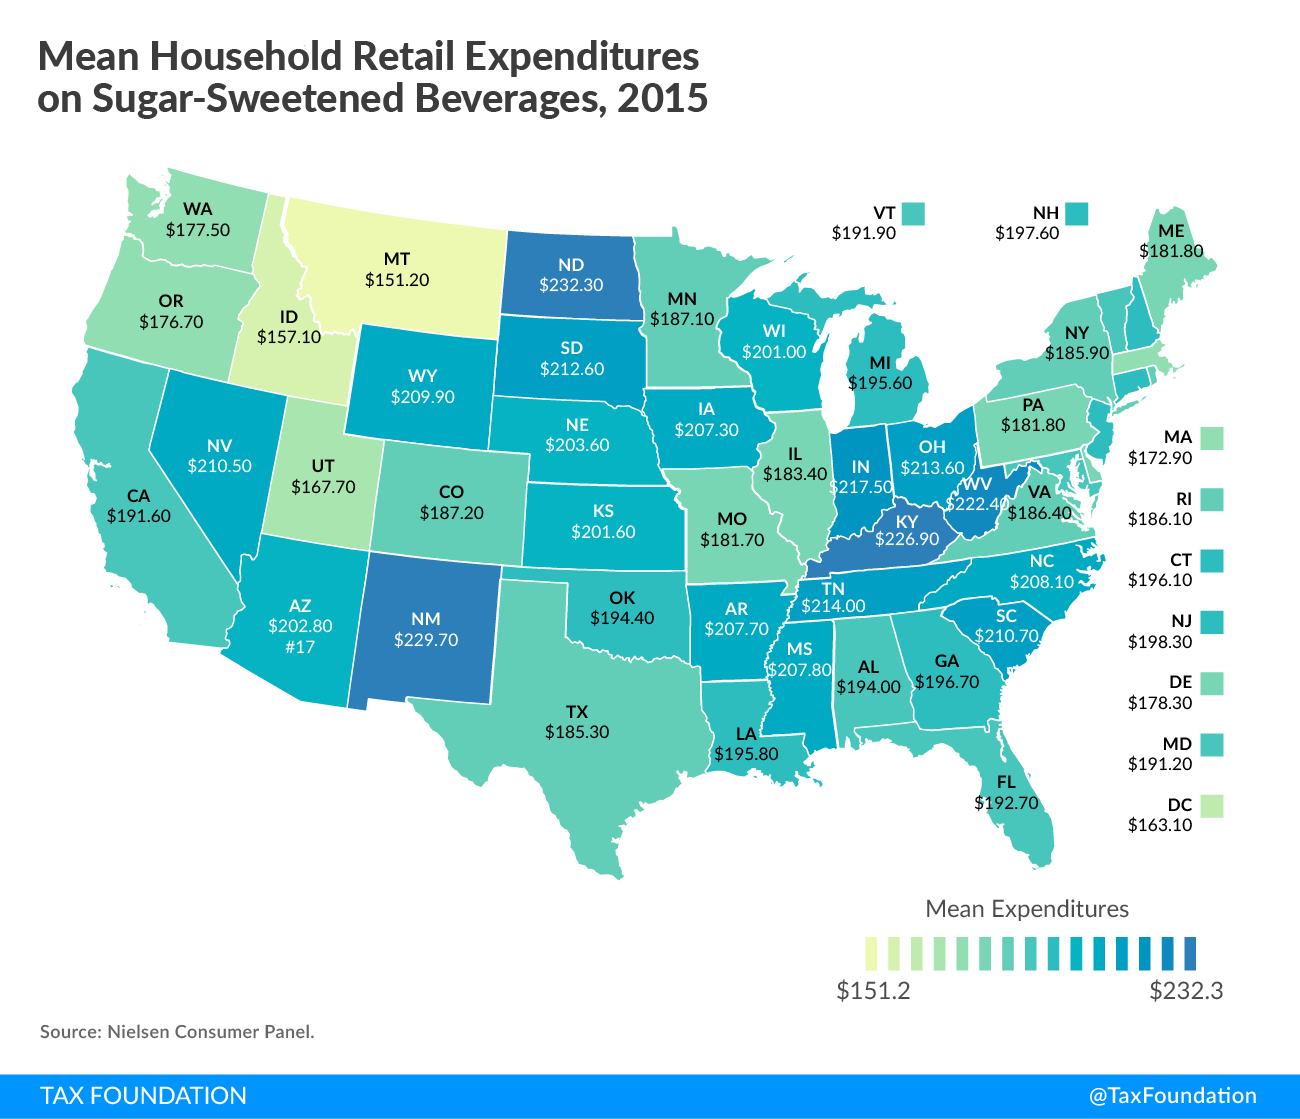 Mean Household Retail Expenditures on Sugar-Sweetened Beverages Map Soda Taxes Sugar-Sweetened Beverage Taxes